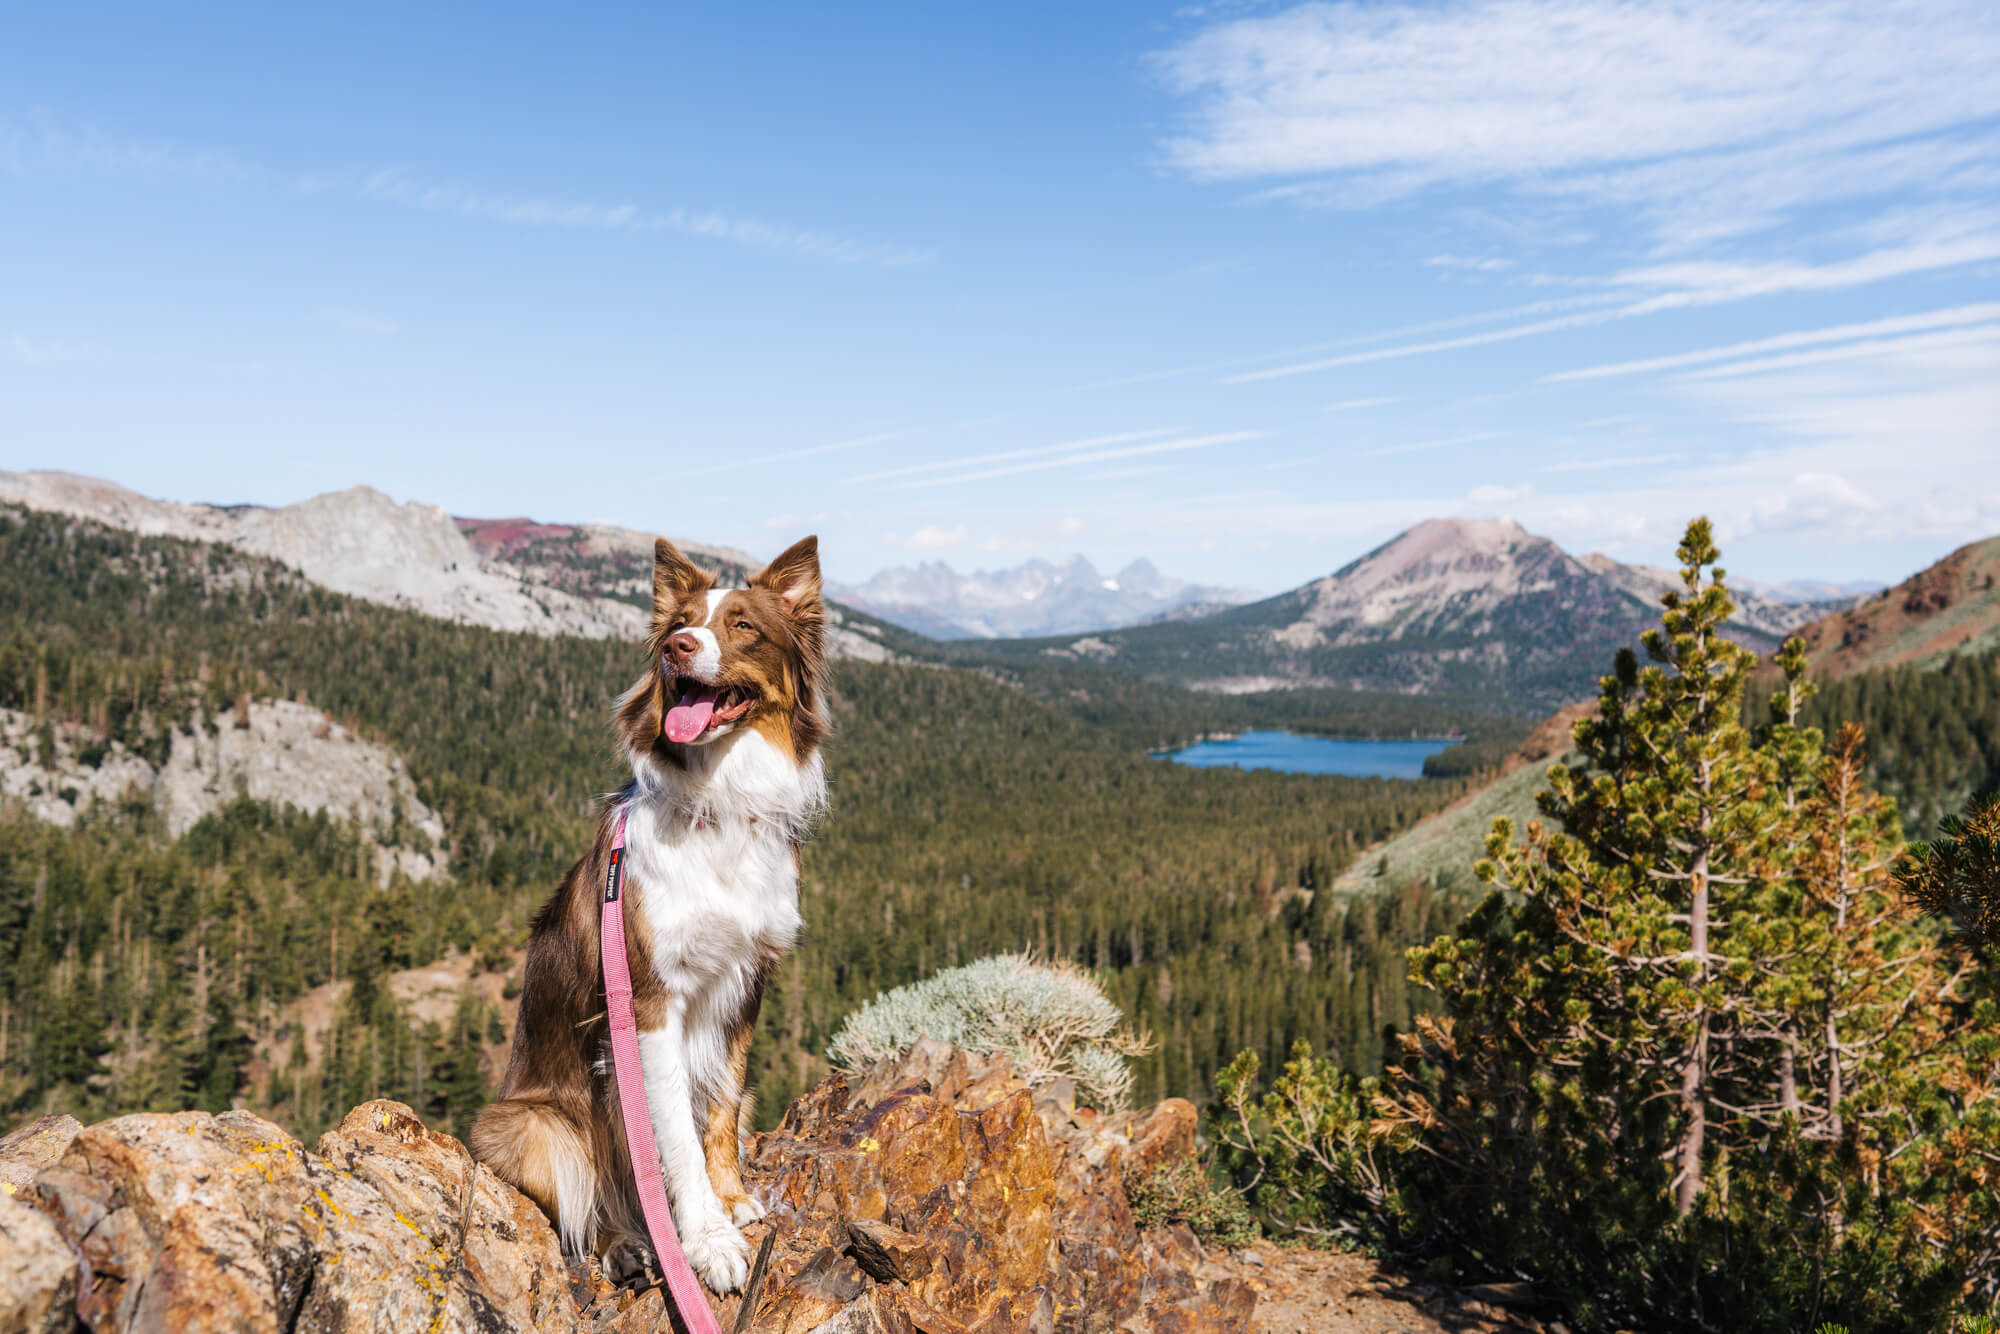 Our dog River posing with a view of the Mammoth Lakes Basin in the background